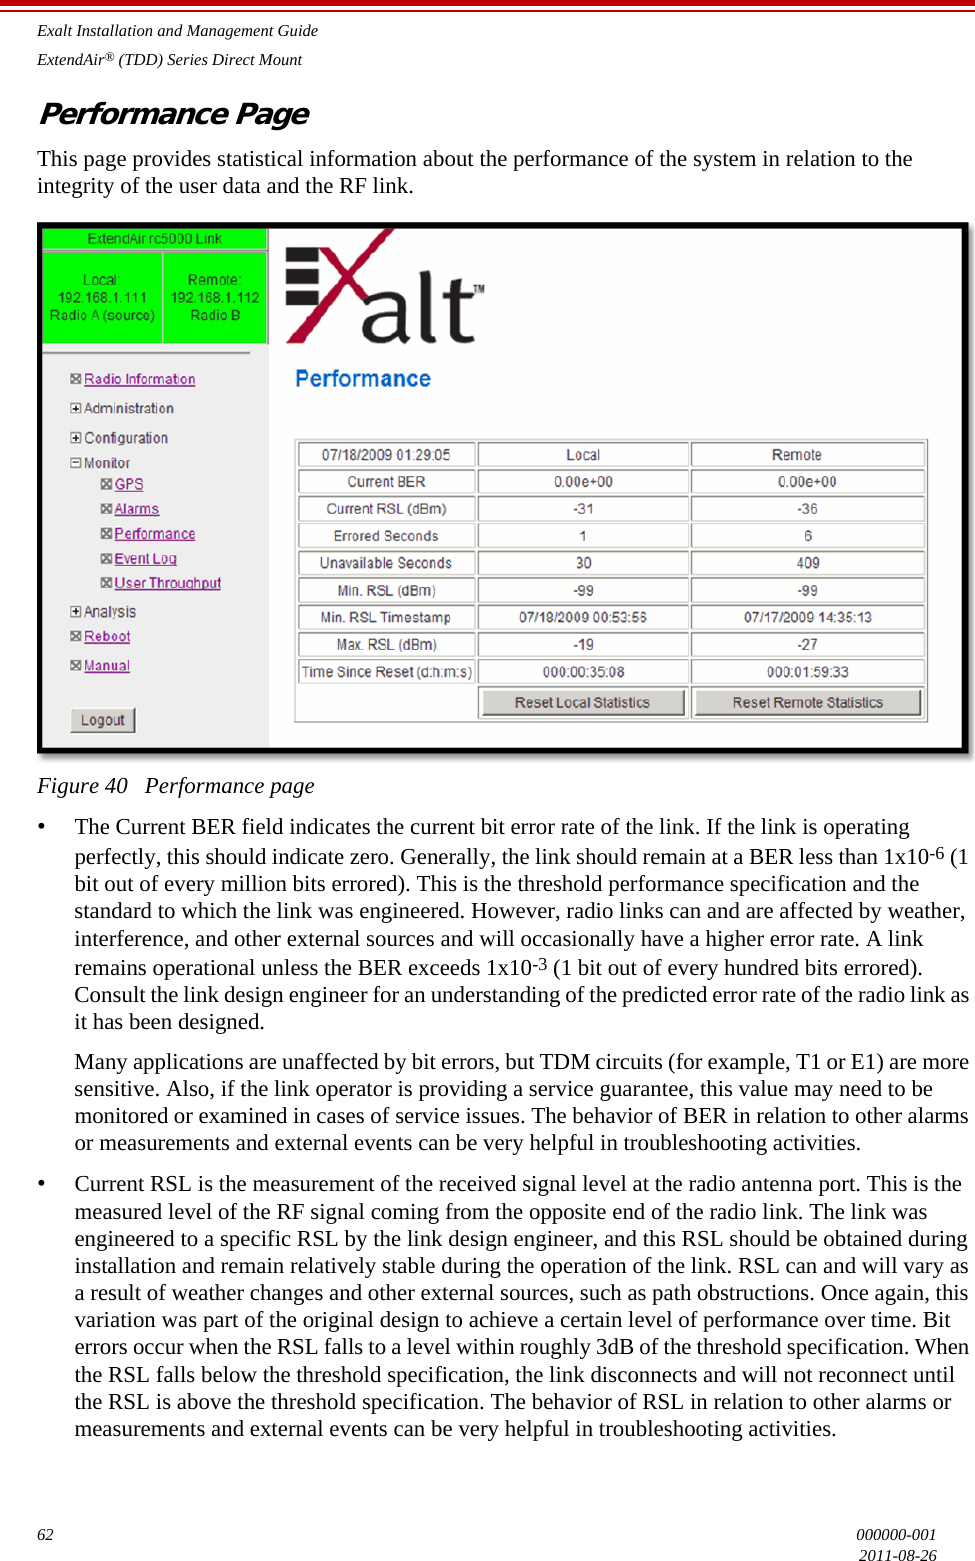 Exalt Installation and Management GuideExtendAir® (TDD) Series Direct Mount62 000000-0012011-08-26Performance PageThis page provides statistical information about the performance of the system in relation to the integrity of the user data and the RF link. Figure 40   Performance page•The Current BER field indicates the current bit error rate of the link. If the link is operating perfectly, this should indicate zero. Generally, the link should remain at a BER less than 1x10-6 (1 bit out of every million bits errored). This is the threshold performance specification and the standard to which the link was engineered. However, radio links can and are affected by weather, interference, and other external sources and will occasionally have a higher error rate. A link remains operational unless the BER exceeds 1x10-3 (1 bit out of every hundred bits errored). Consult the link design engineer for an understanding of the predicted error rate of the radio link as it has been designed. Many applications are unaffected by bit errors, but TDM circuits (for example, T1 or E1) are more sensitive. Also, if the link operator is providing a service guarantee, this value may need to be monitored or examined in cases of service issues. The behavior of BER in relation to other alarms or measurements and external events can be very helpful in troubleshooting activities.•Current RSL is the measurement of the received signal level at the radio antenna port. This is the measured level of the RF signal coming from the opposite end of the radio link. The link was engineered to a specific RSL by the link design engineer, and this RSL should be obtained during installation and remain relatively stable during the operation of the link. RSL can and will vary as a result of weather changes and other external sources, such as path obstructions. Once again, this variation was part of the original design to achieve a certain level of performance over time. Bit errors occur when the RSL falls to a level within roughly 3dB of the threshold specification. When the RSL falls below the threshold specification, the link disconnects and will not reconnect until the RSL is above the threshold specification. The behavior of RSL in relation to other alarms or measurements and external events can be very helpful in troubleshooting activities.